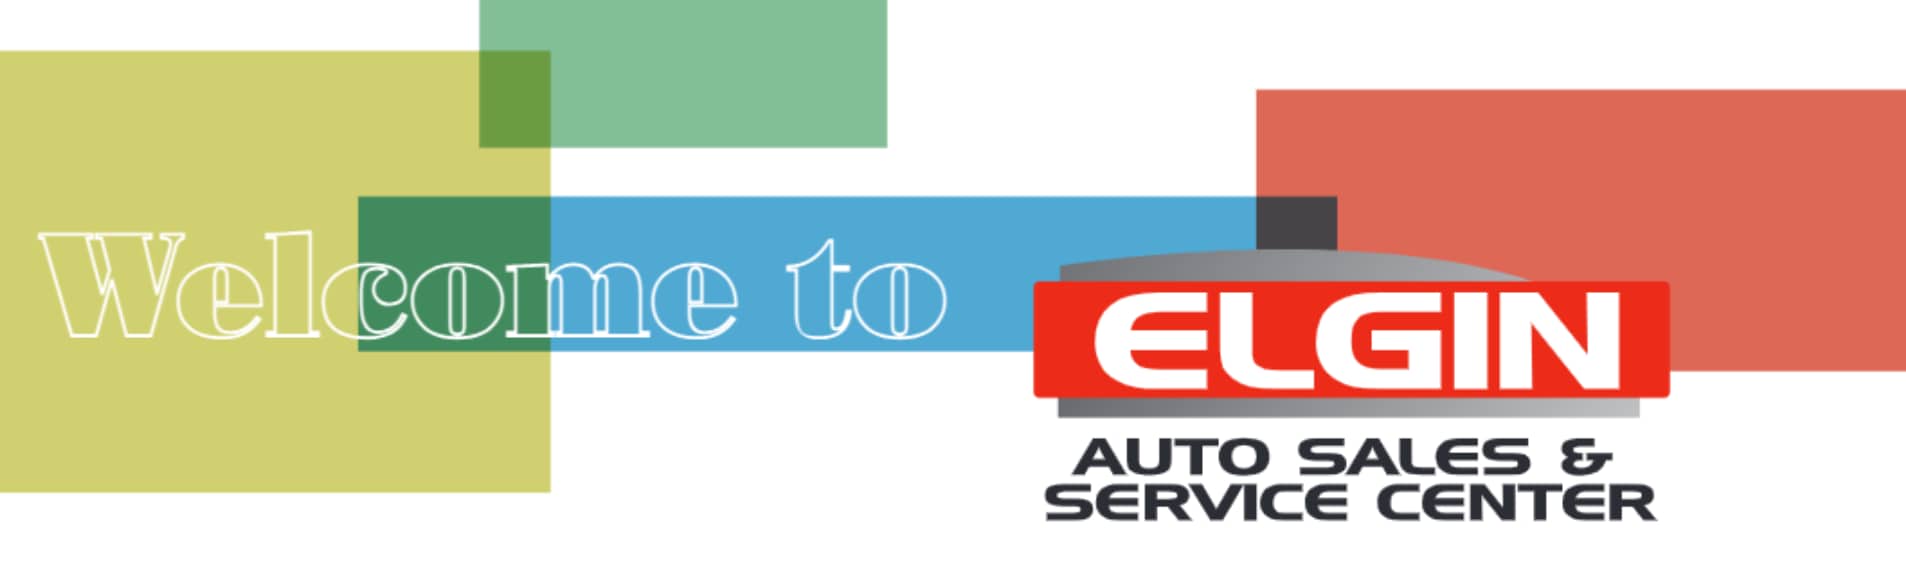 About Elgin Auto Sales & Service Center: Meeting and Surpassing Expectations